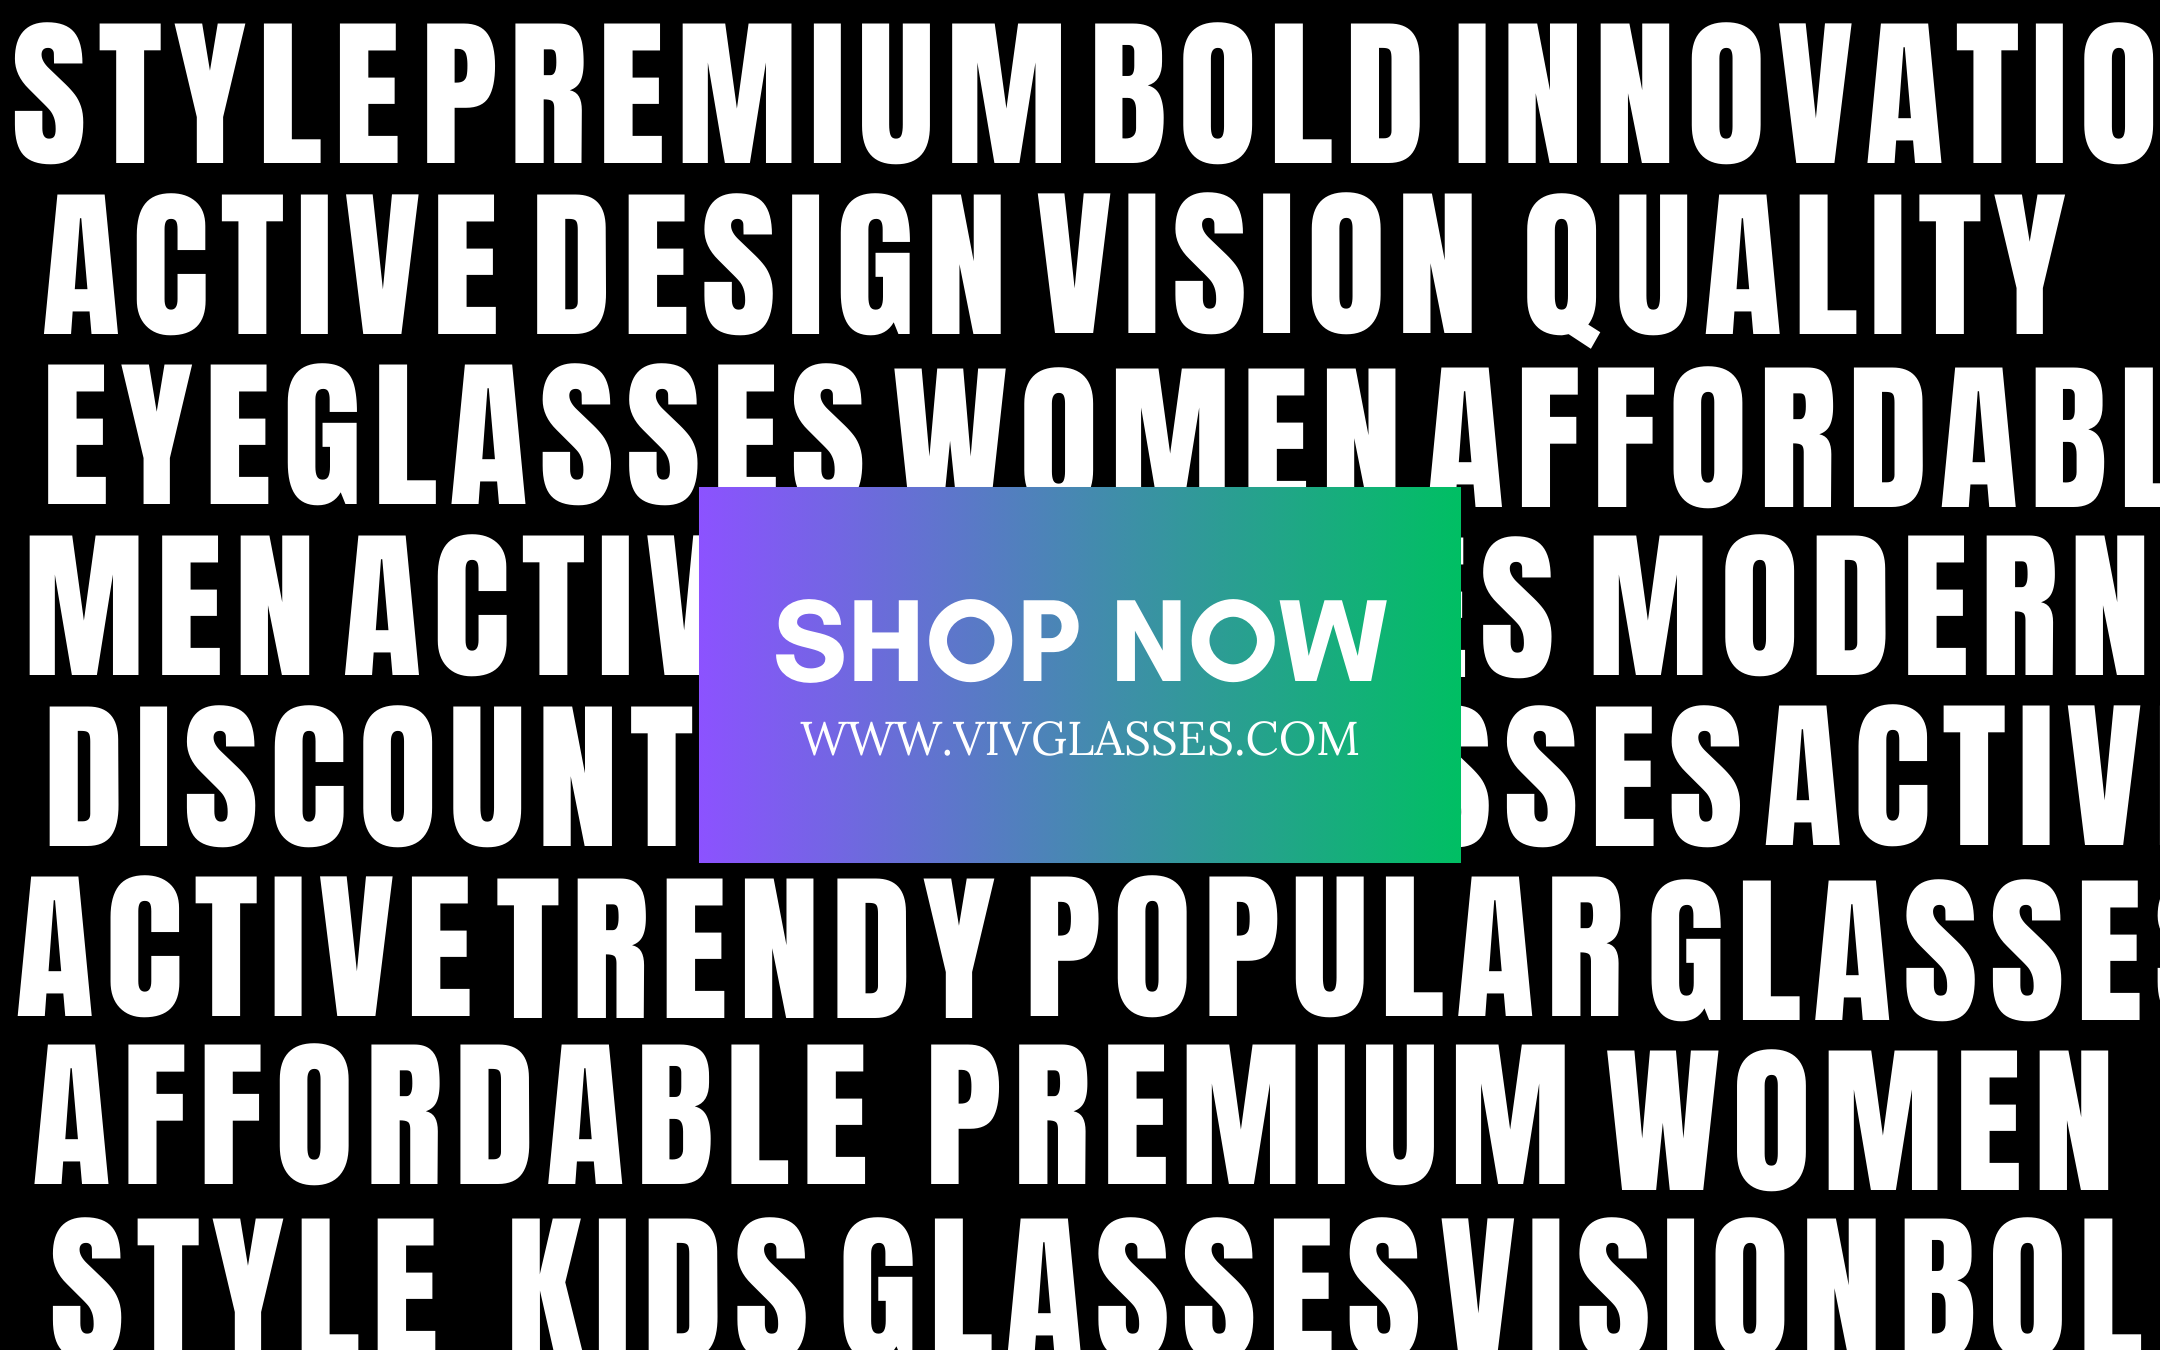 Shop now! Discounted Premium and affordable Men, Women and Kid's Eyeglasses, High quality prescription and sunglasses from VivGlasses